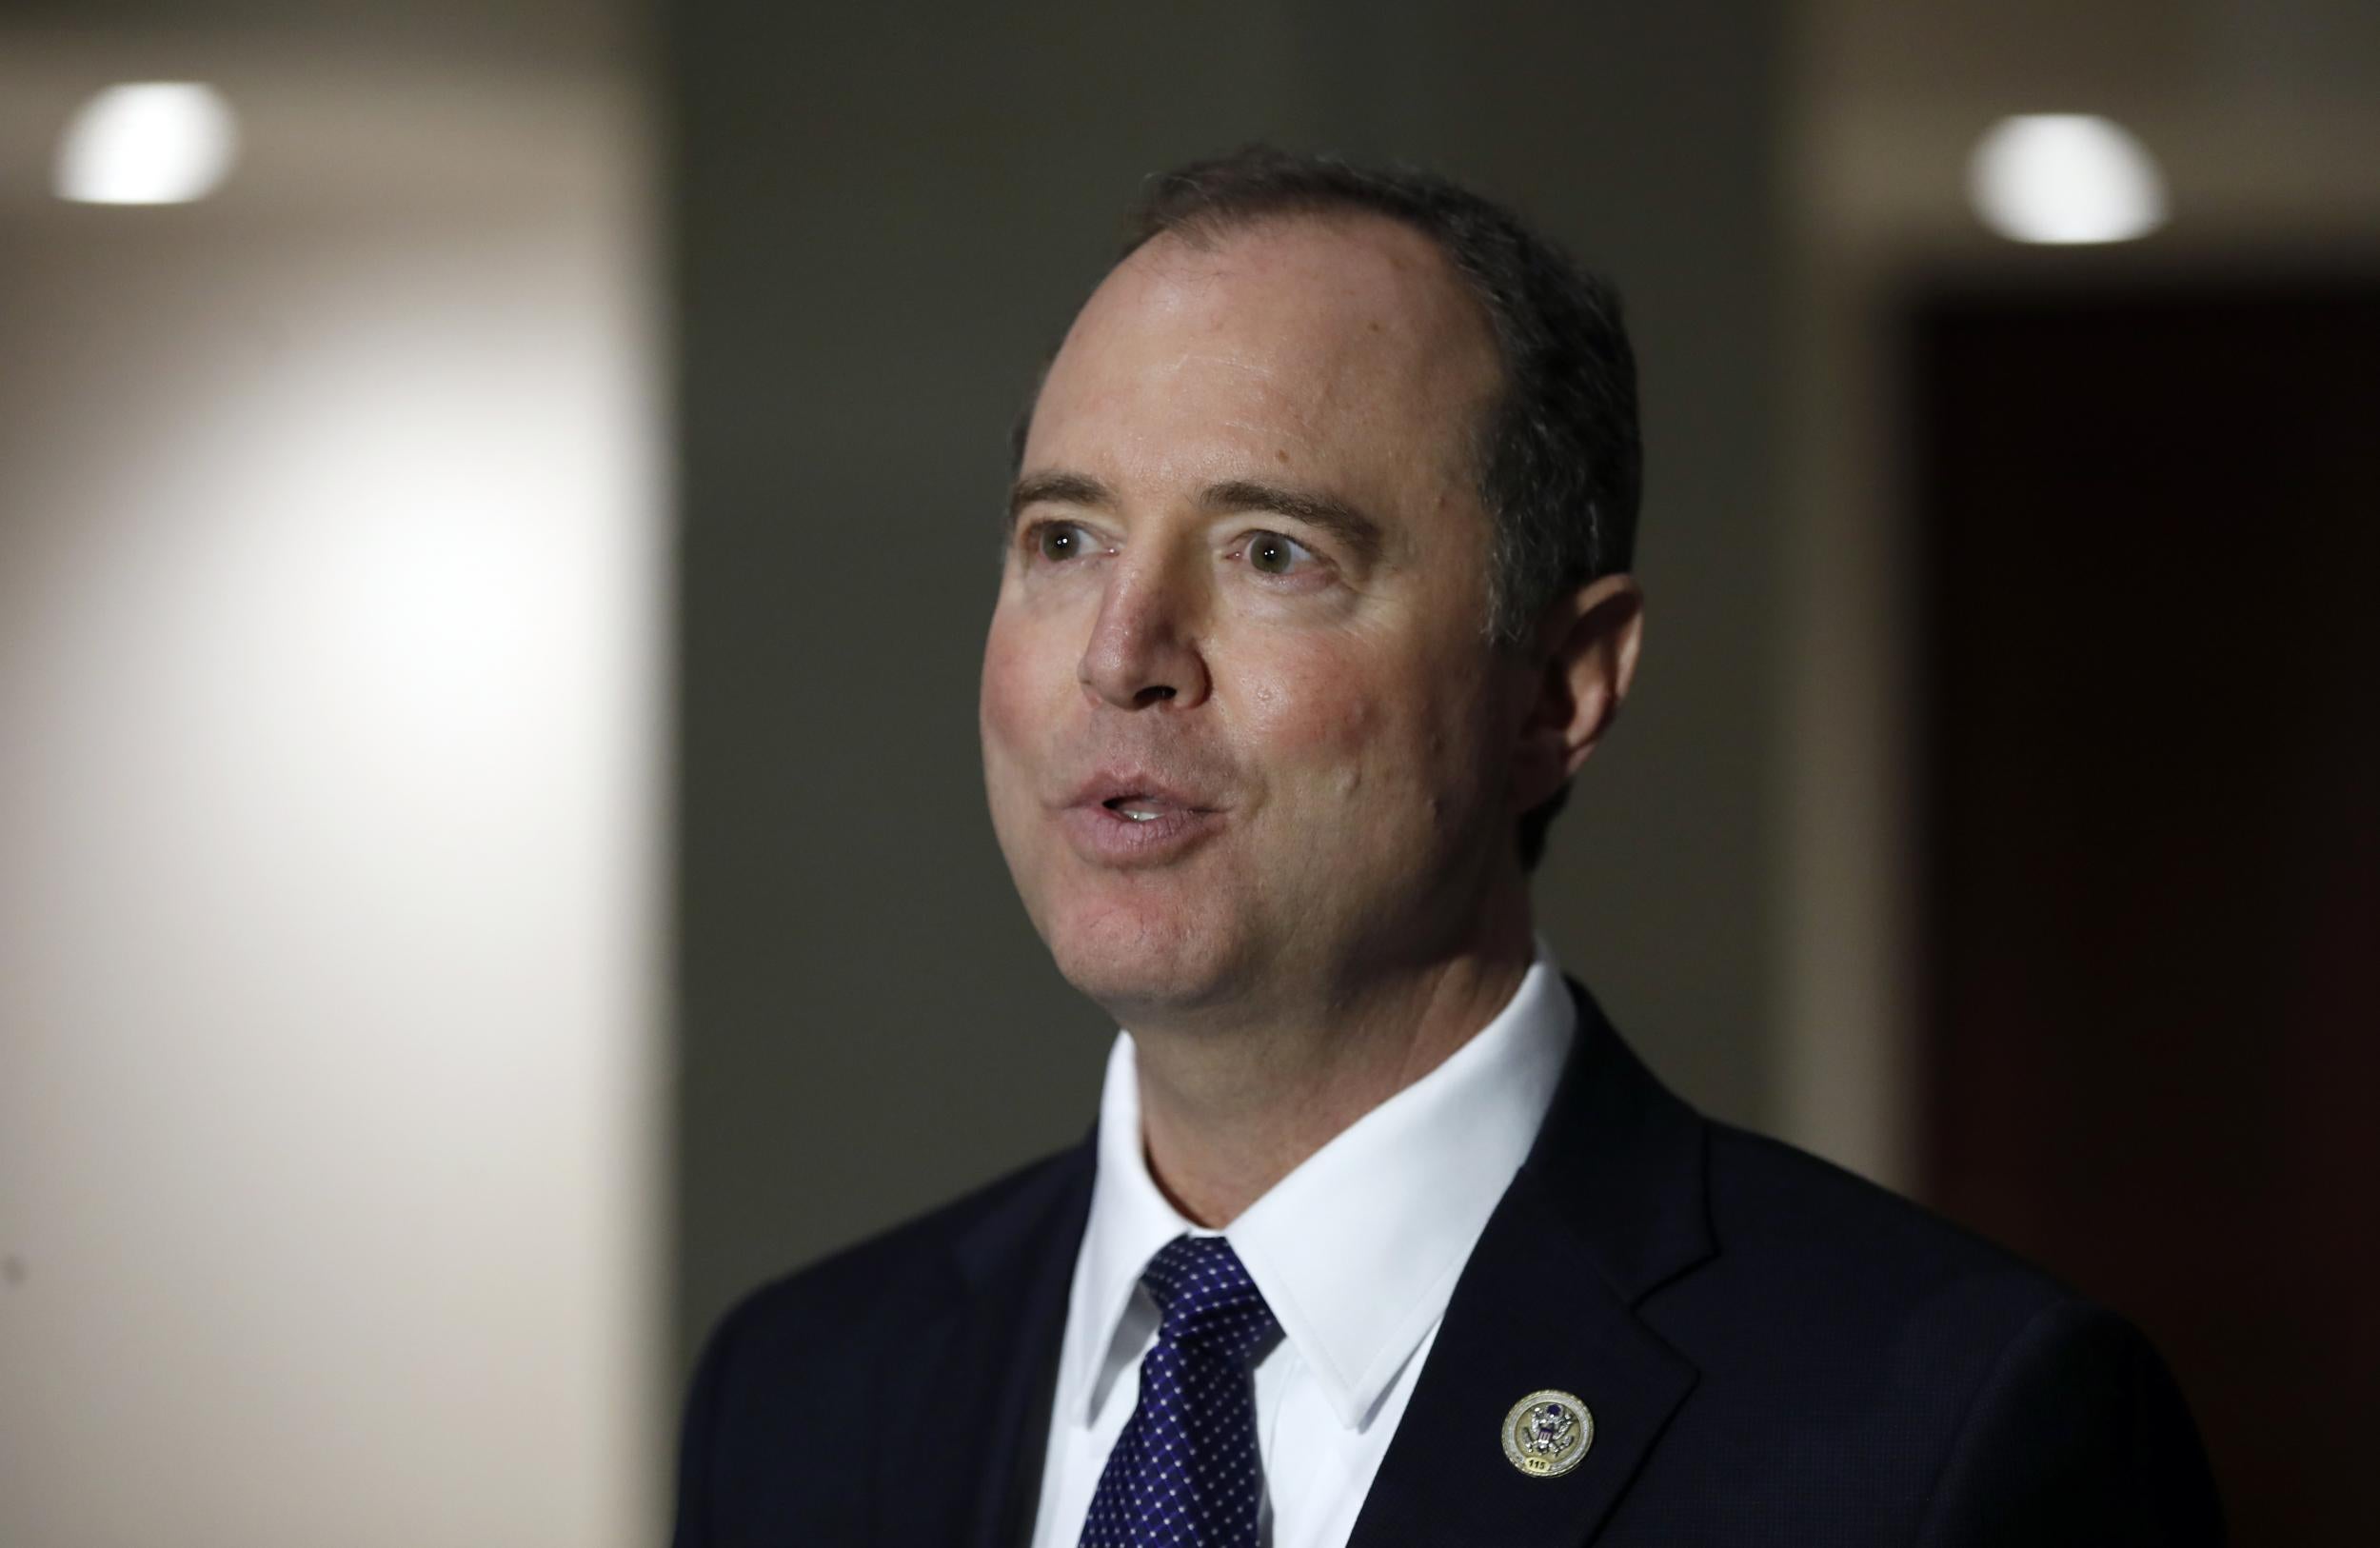 Adam Schiff speaks during a media availability after a closed-door meeting of the House Intelligence Committee